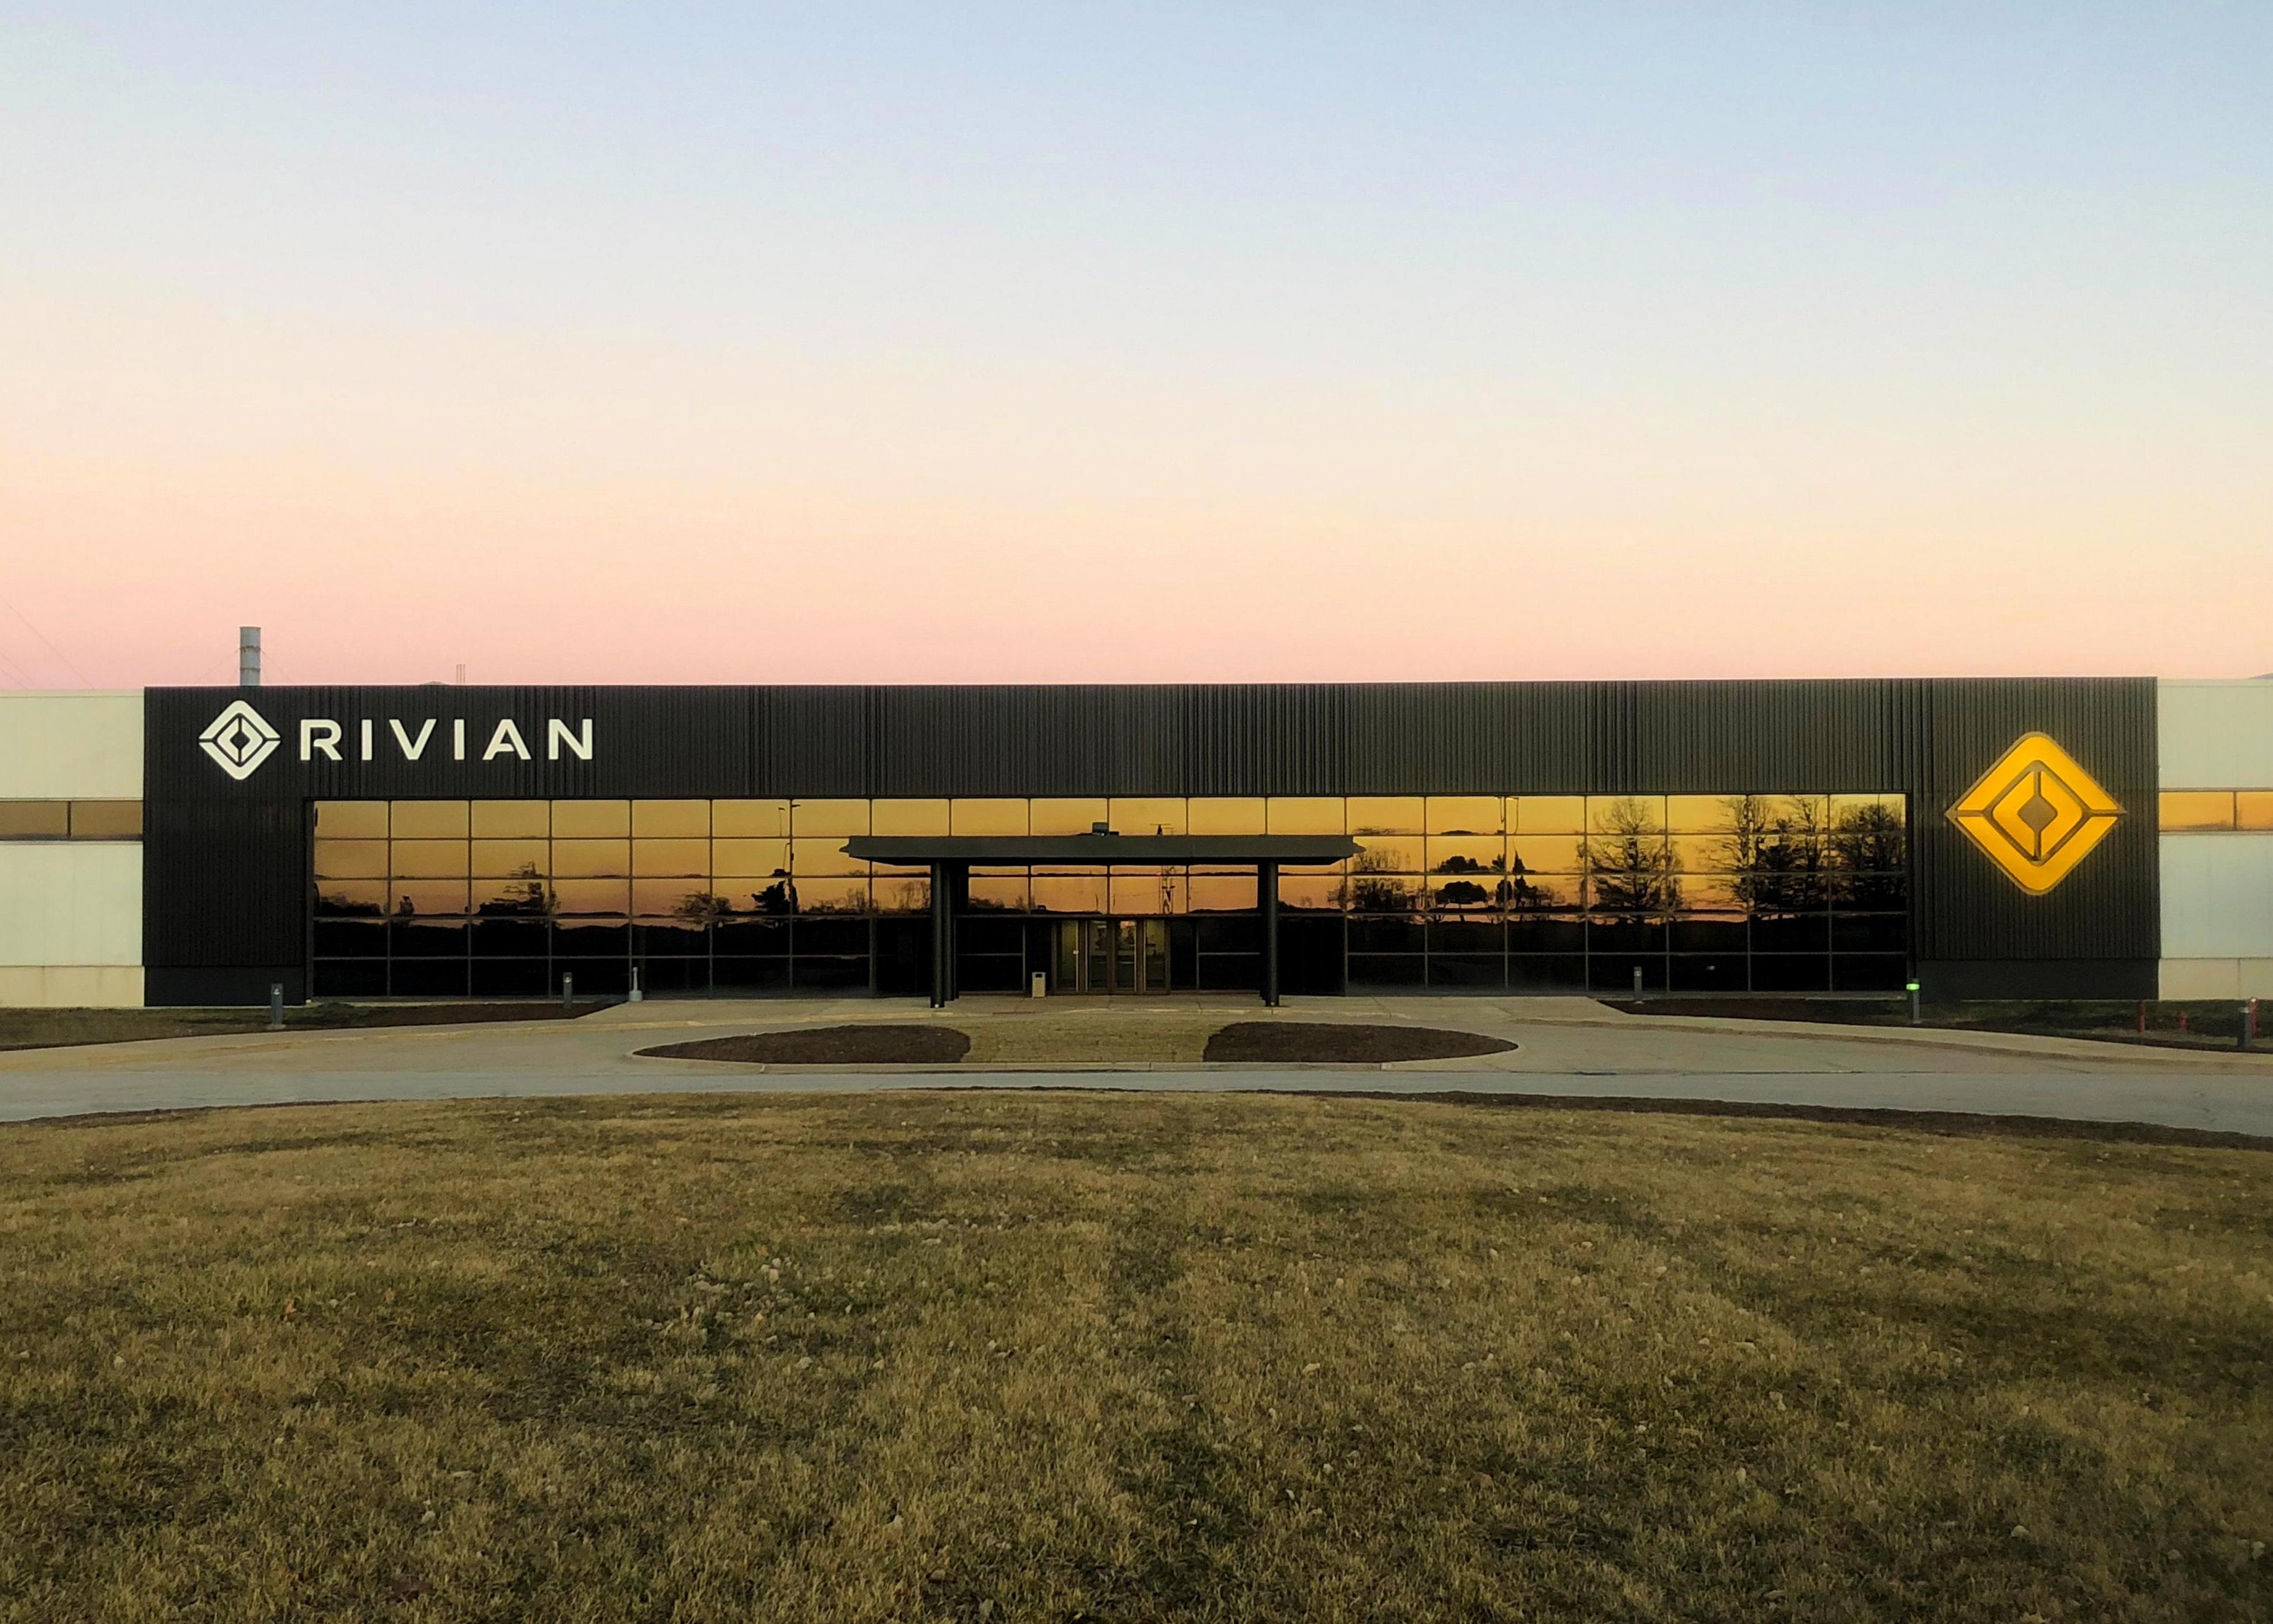 Rivian's manufacturing facility in Normal, IL